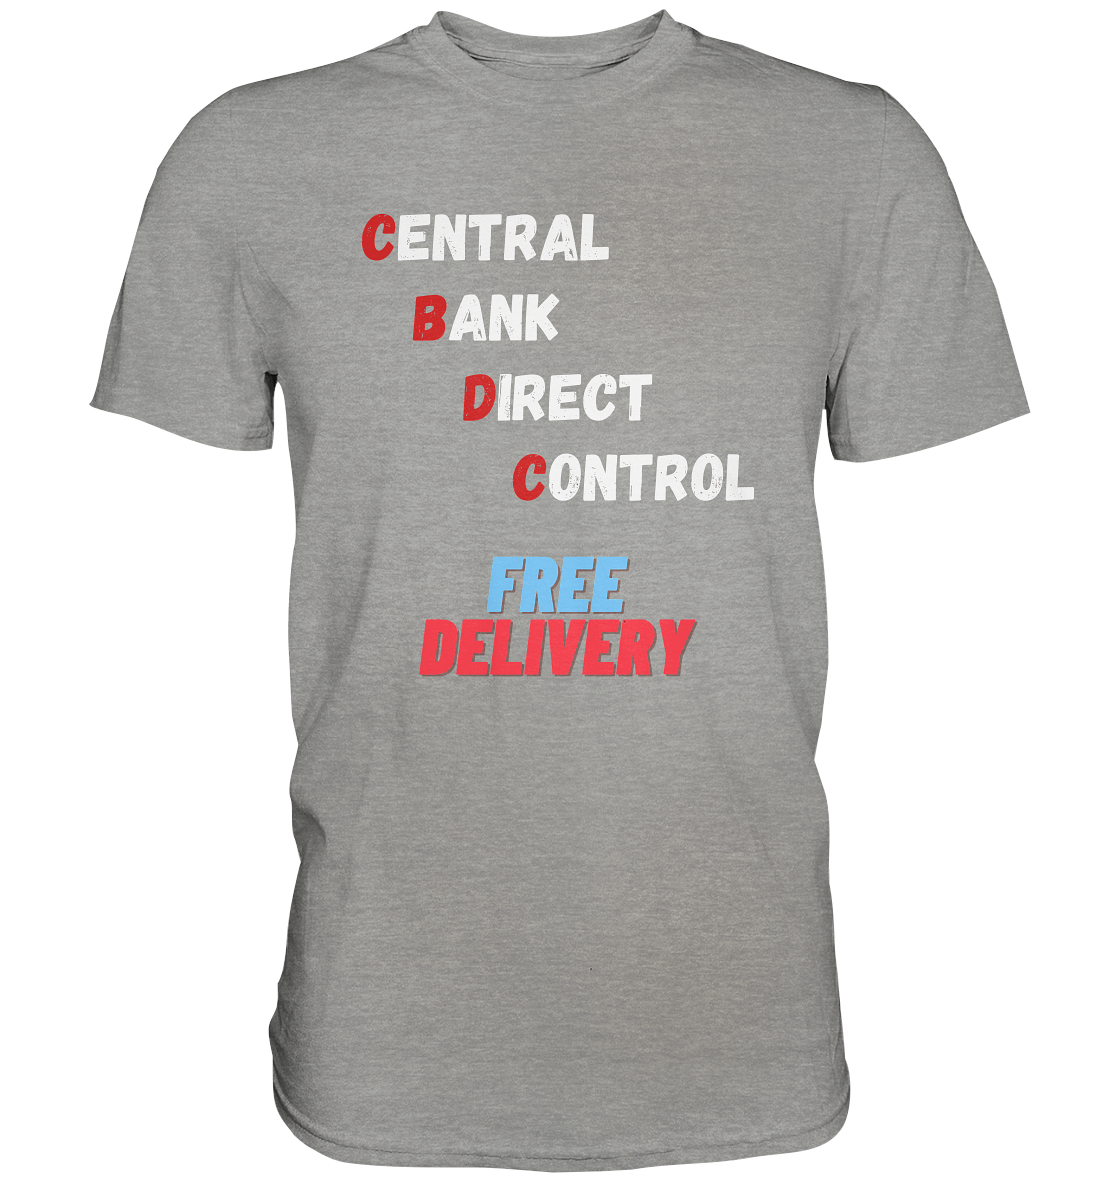 CENTRAL BANK DIRECT CONTROL - FREE DELIVERY - Premium Shirt